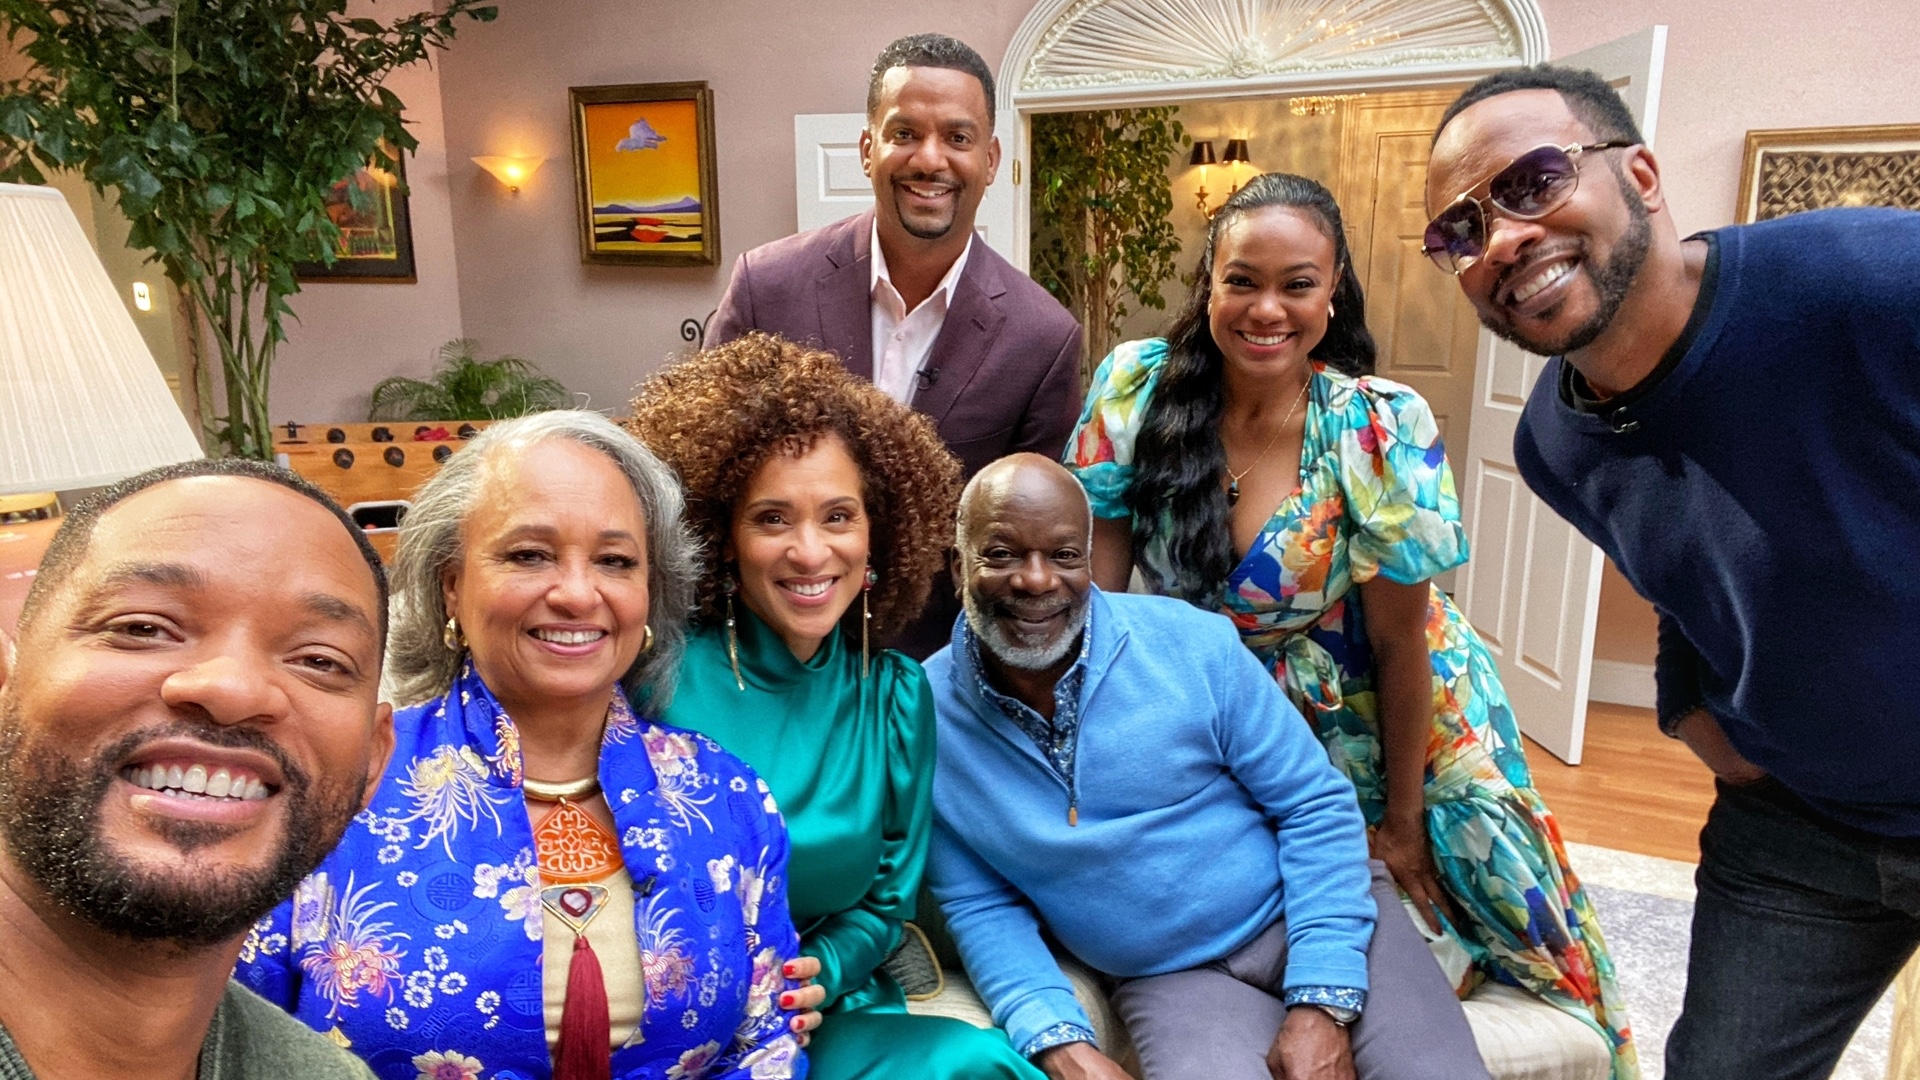 the fresh prince of bel air reunion watch online free